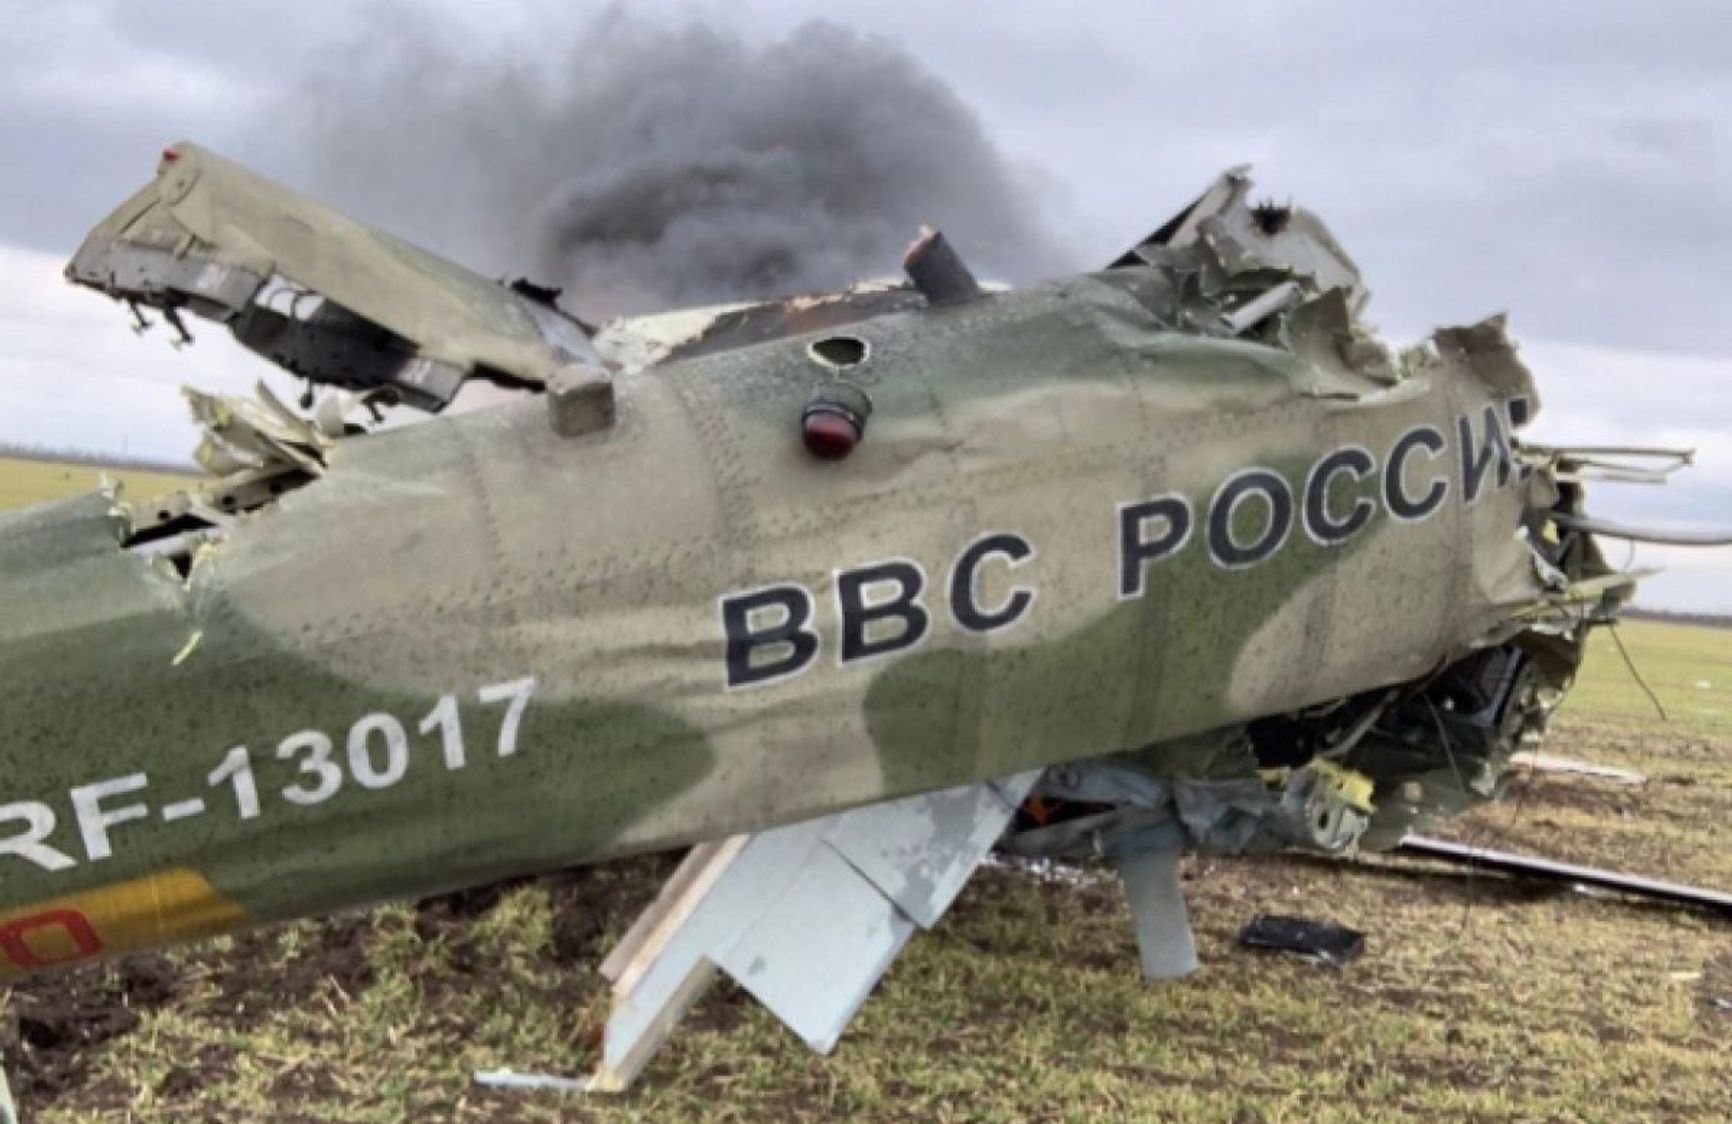 Wreckage of a helicopter shot down in the Nikolayev region